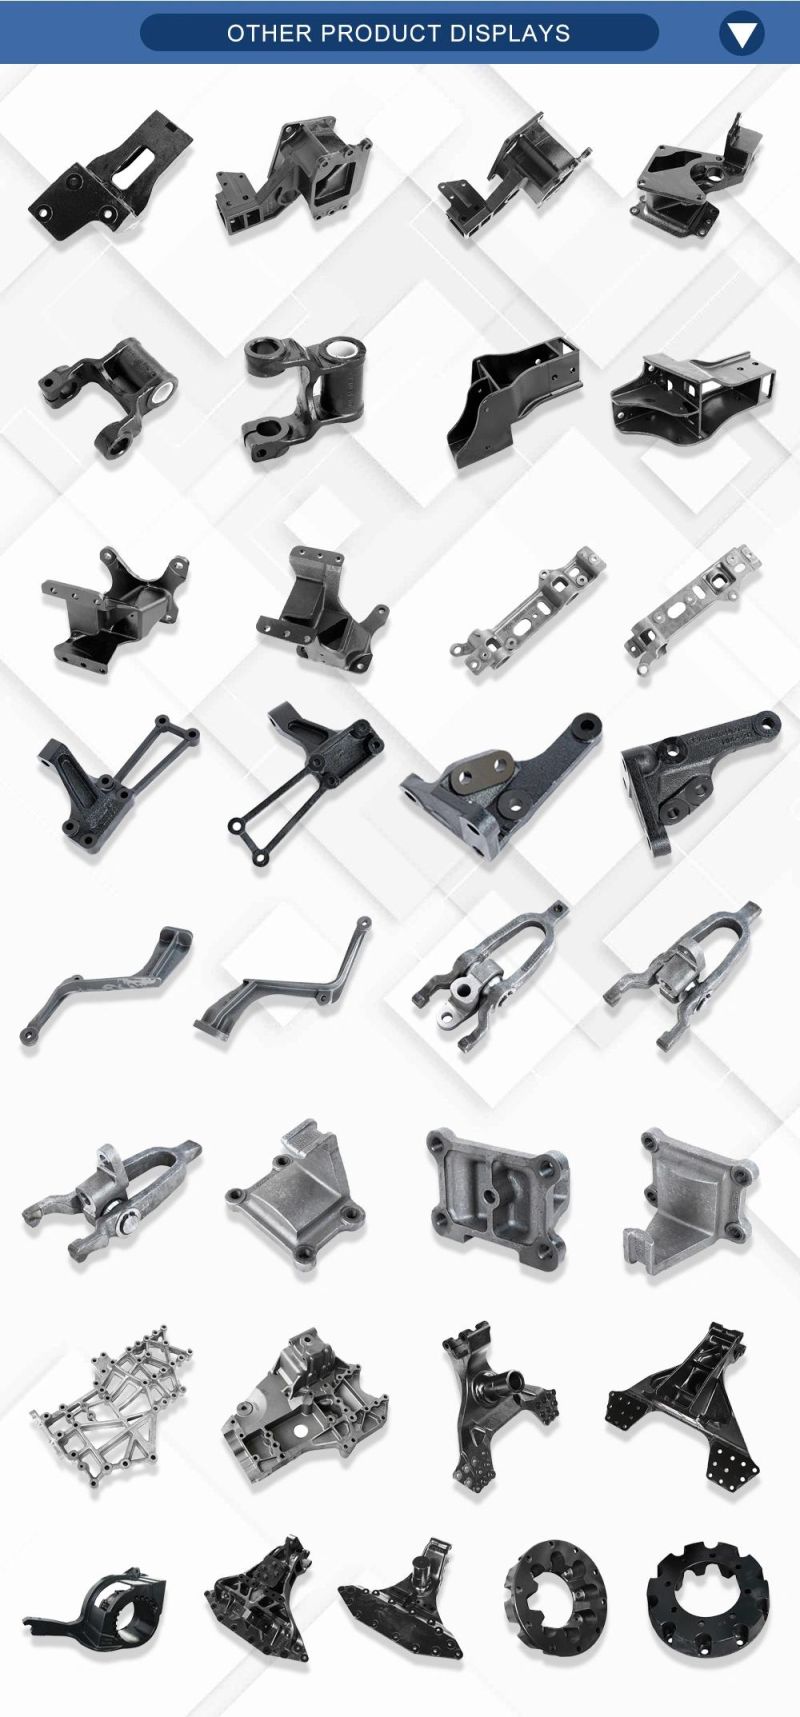 Gravity Casting, Investment Casting, Sand Casting, Ductile Iron, Rear Leaf Spring, Front Bracket, 4 Holes, Heavy Truck Parts